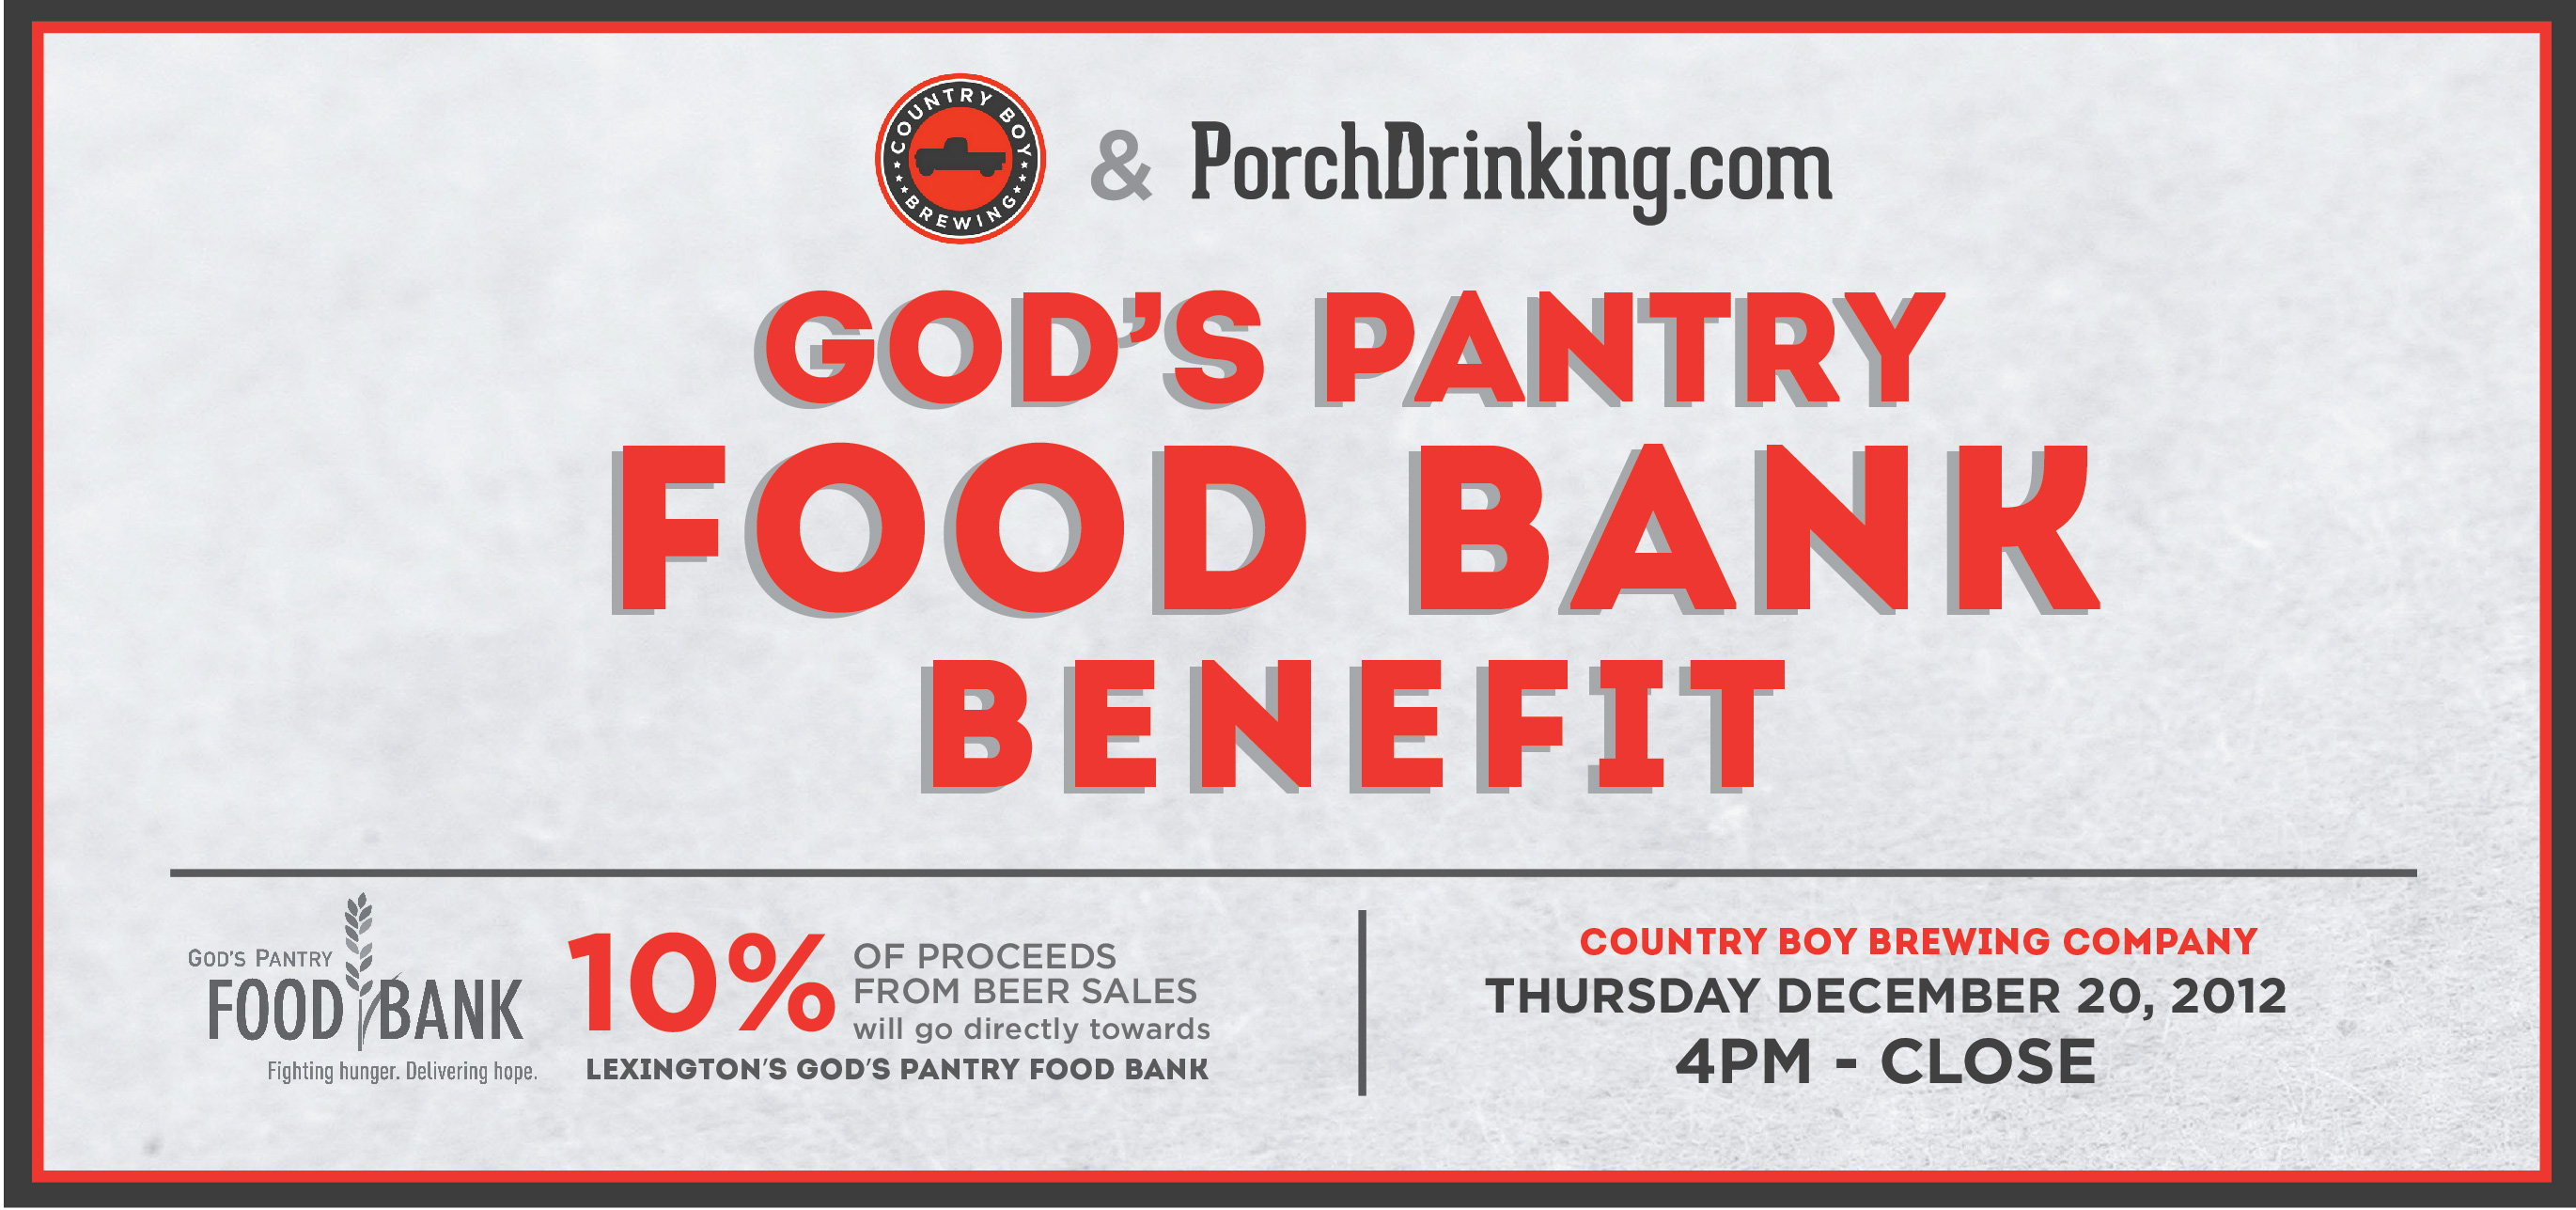 PorchDrinking and Country Boy Brewing God’s Pantry Food Bank Event